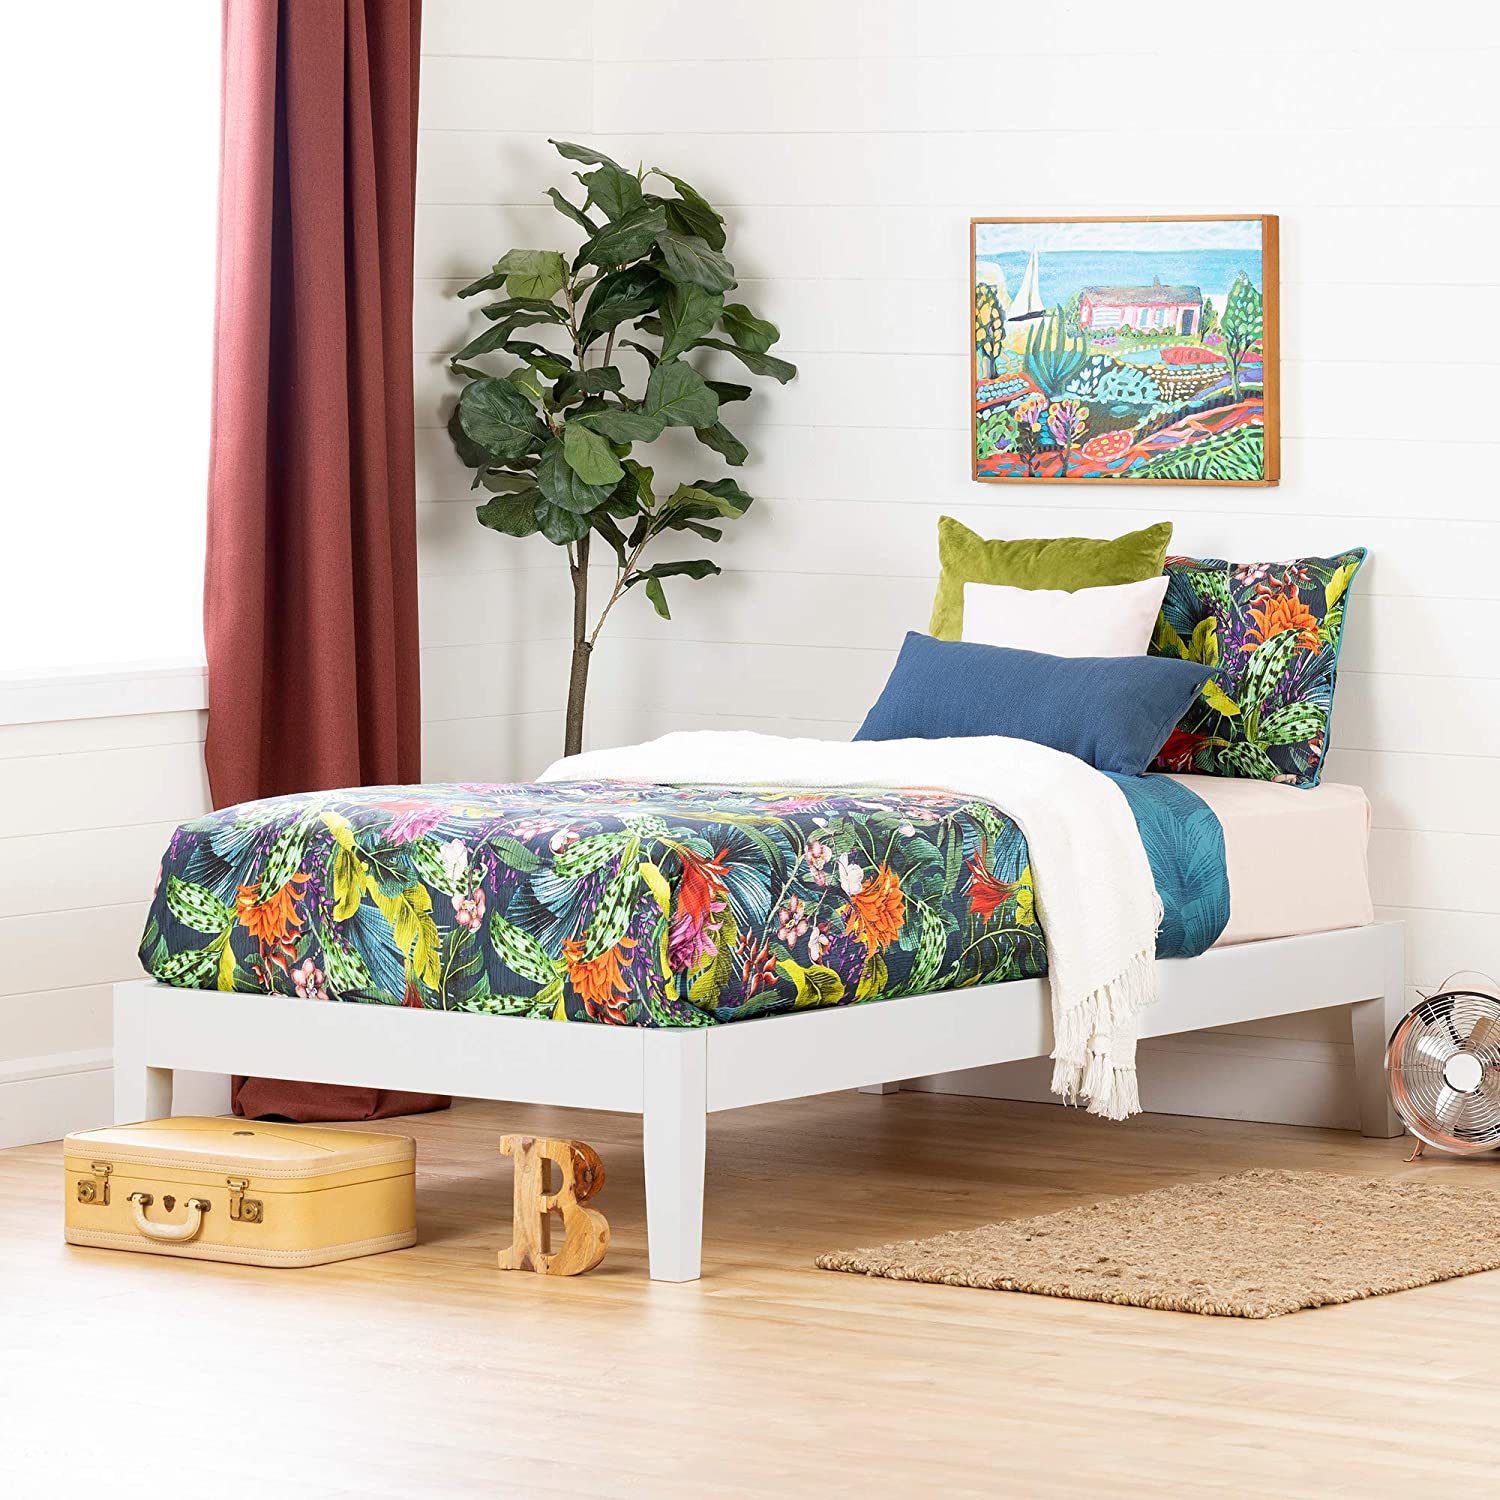 Platform Twin Bed In White By South Shore. - $198.94